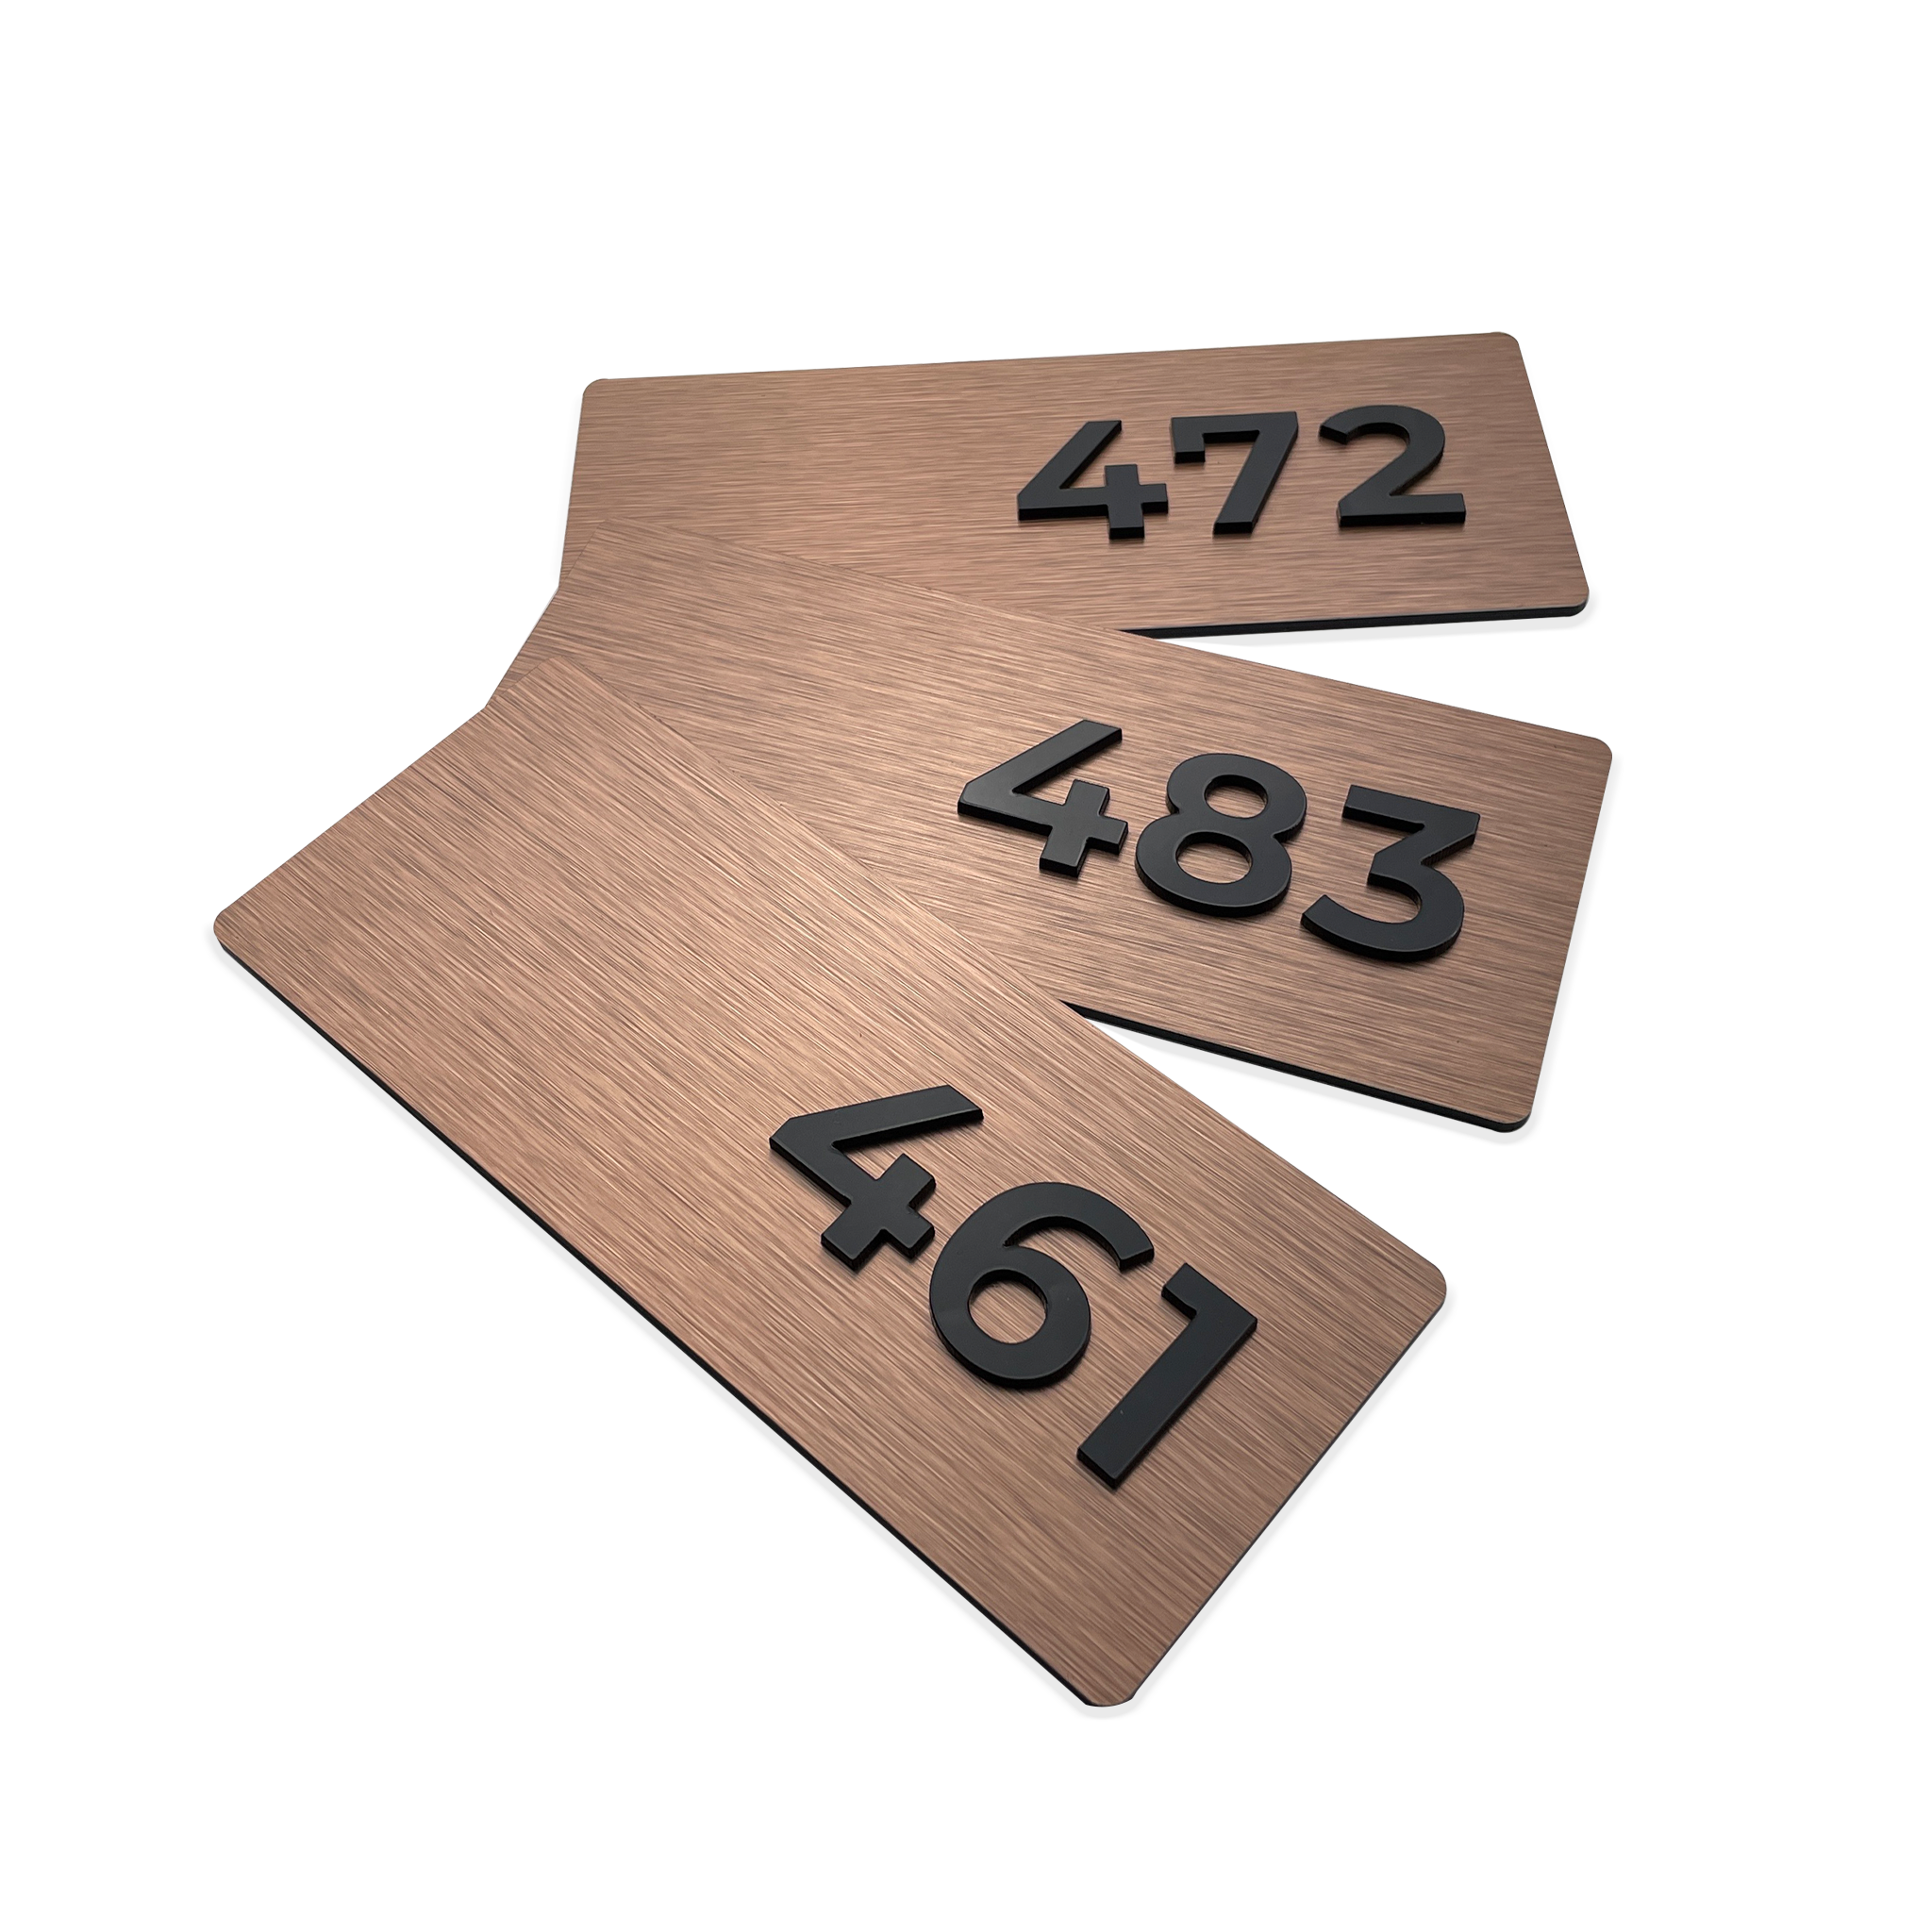 BRONZE APARTMENT NUMBER SIGNS